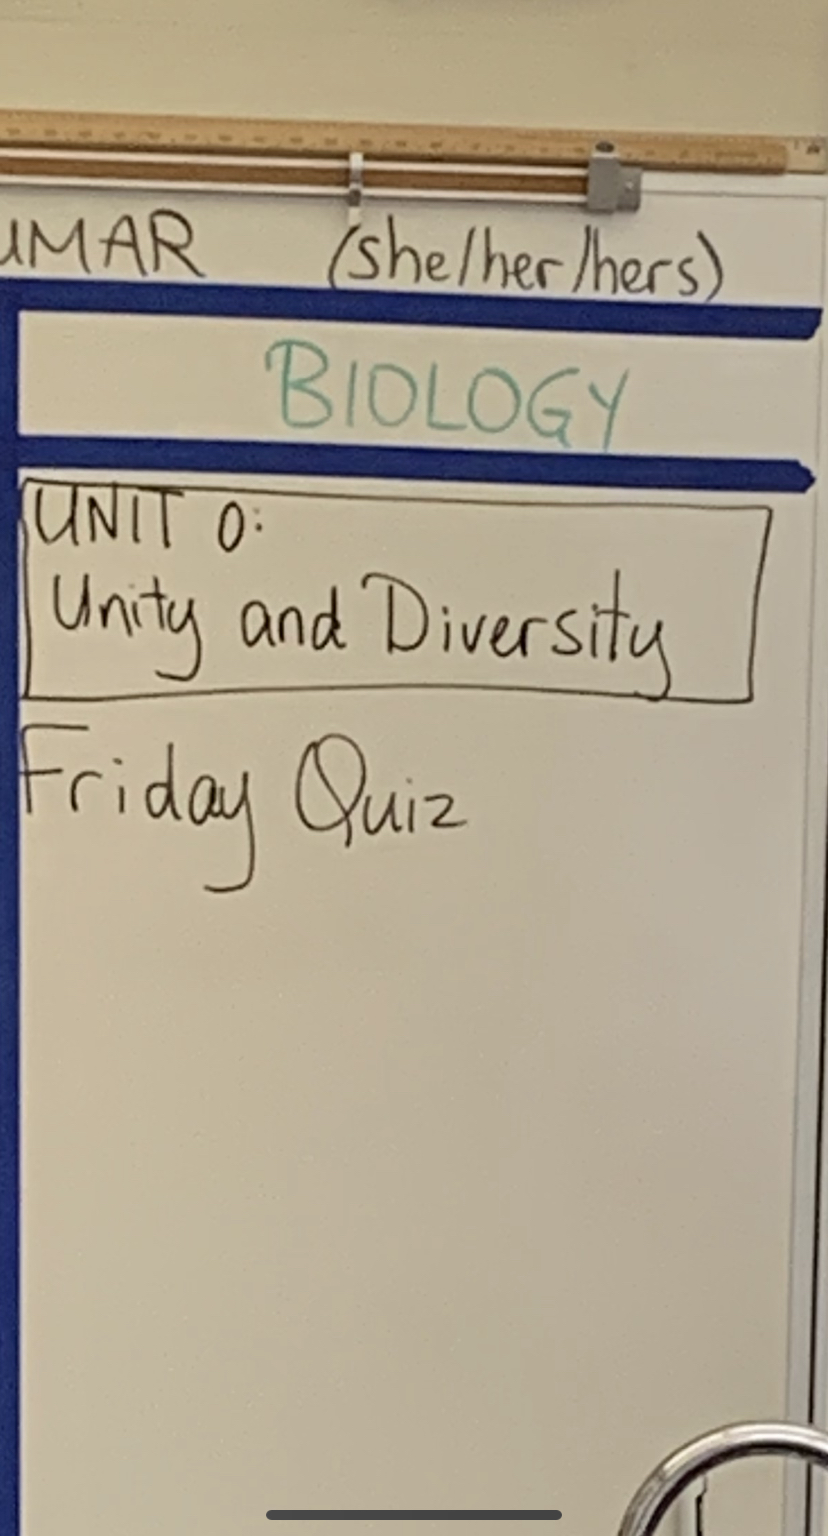 The First Unit for Biology